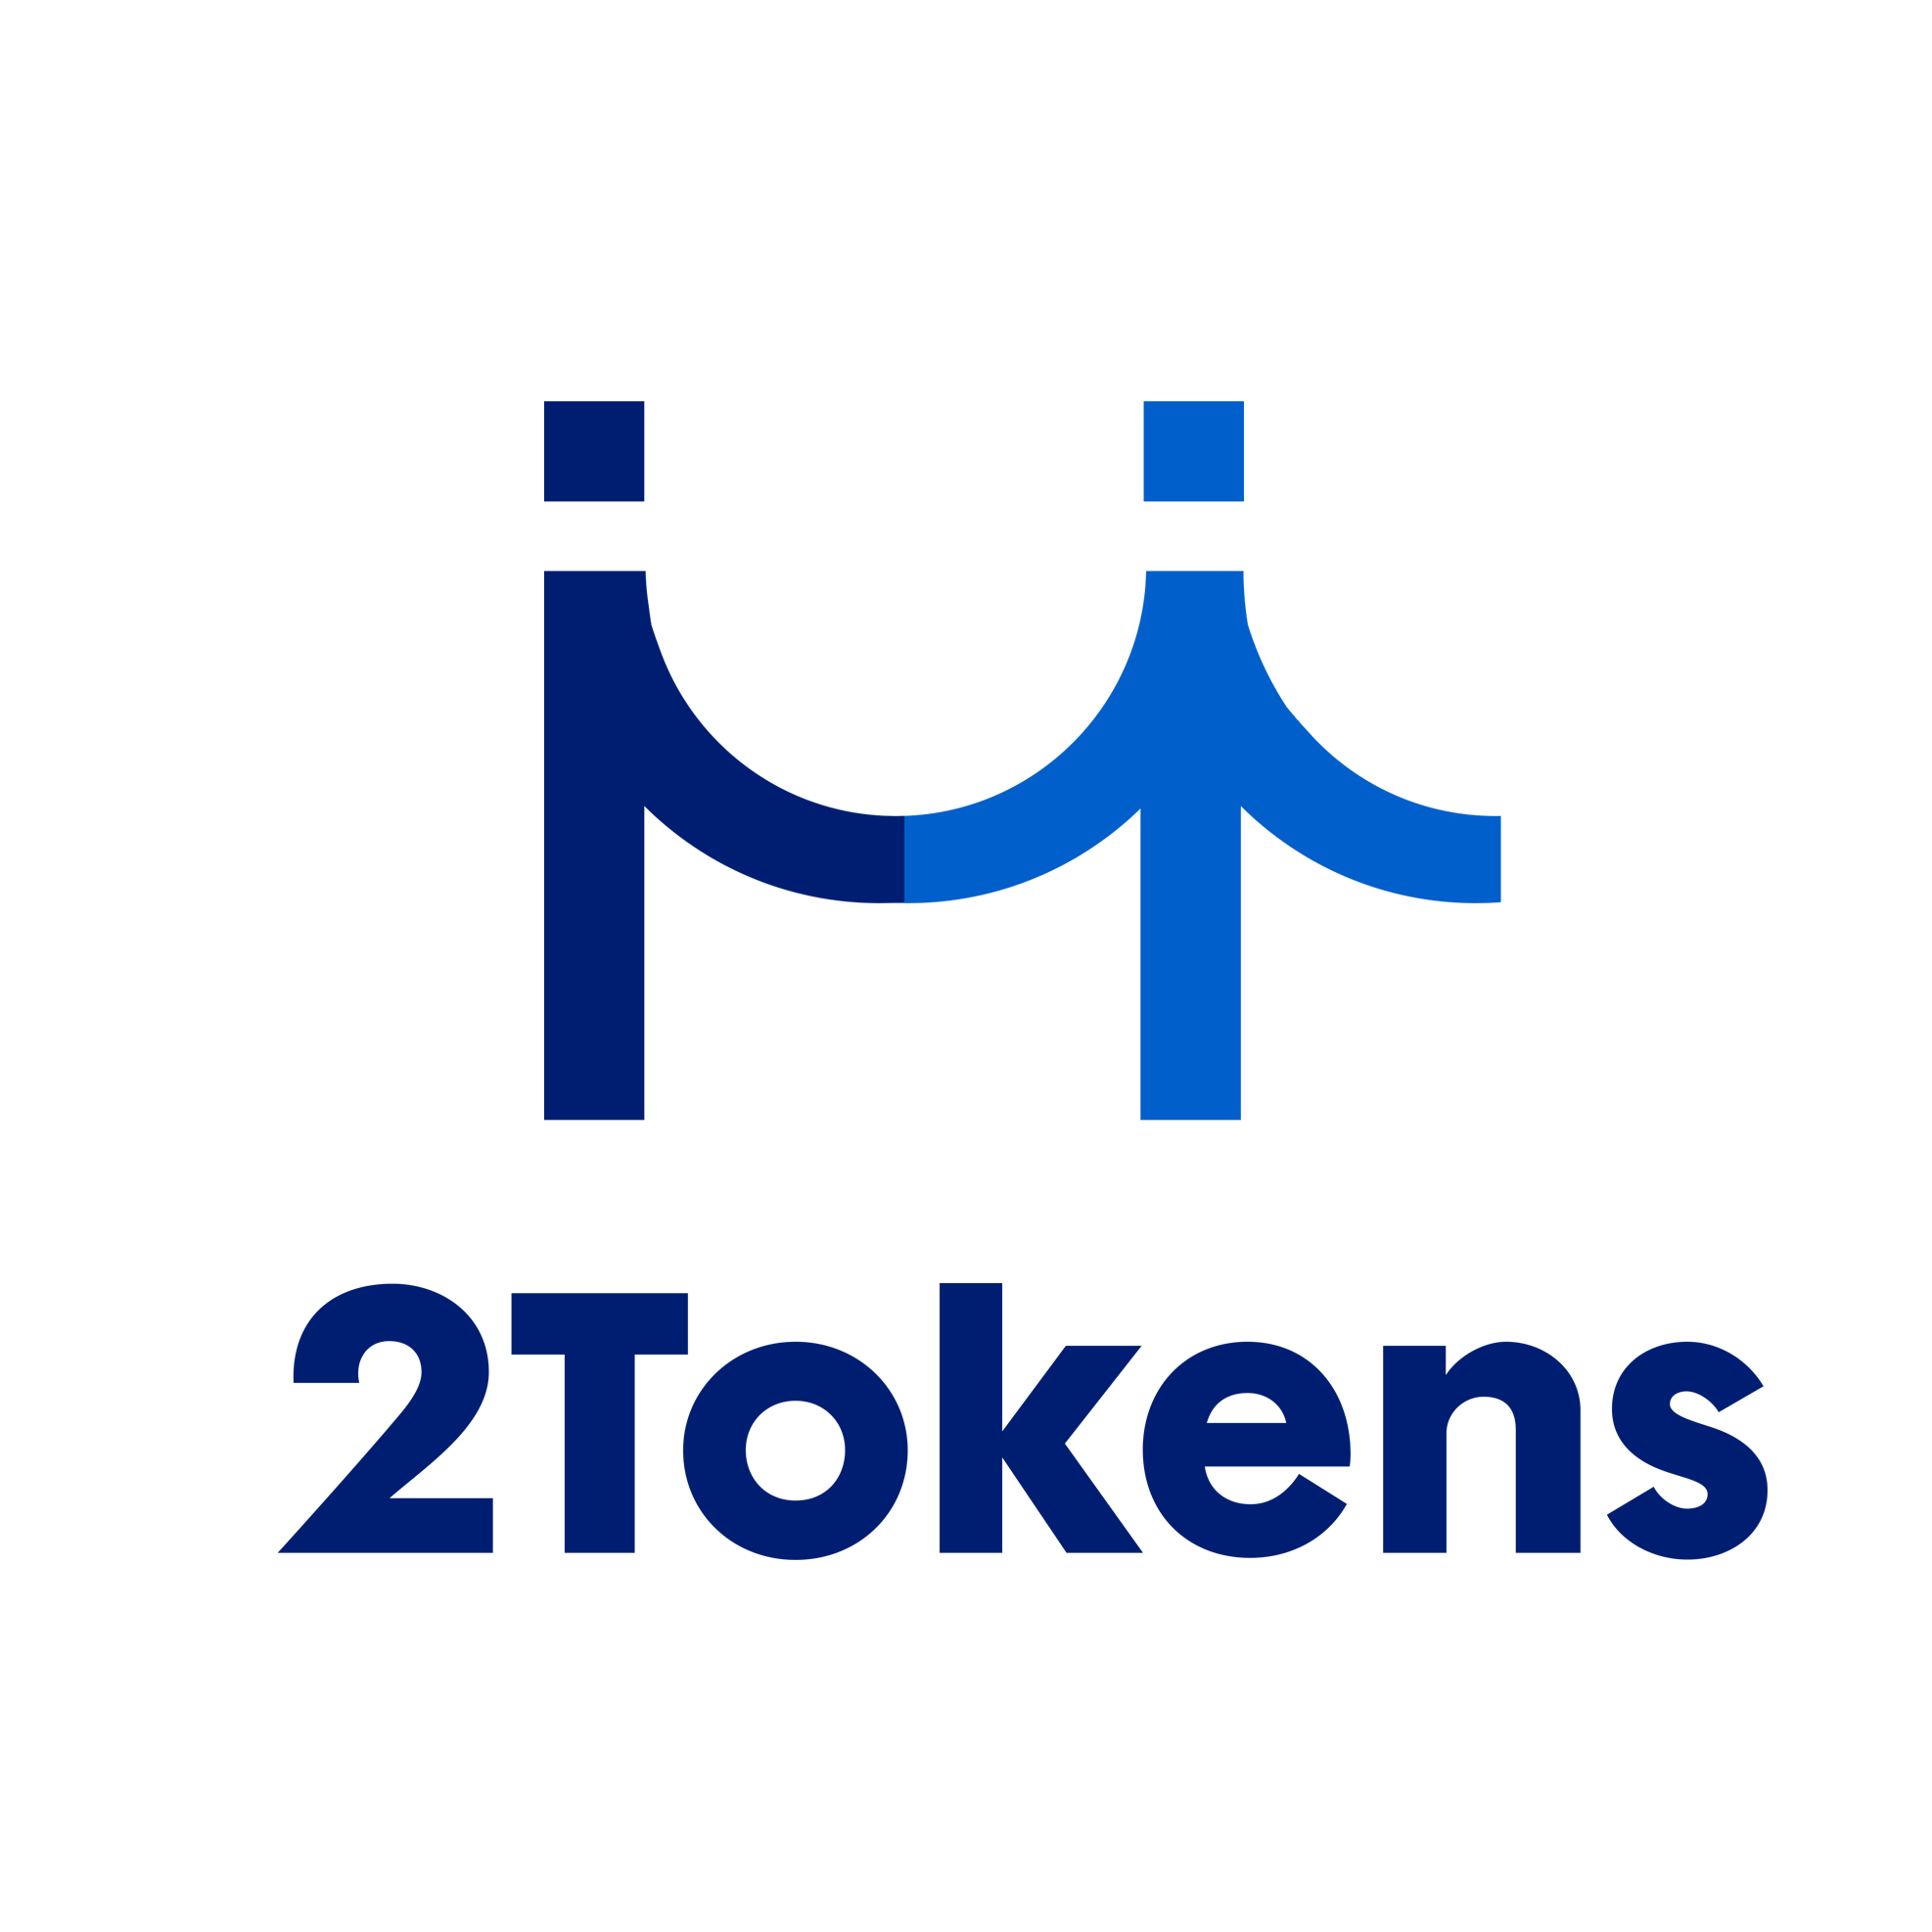 2Tokens